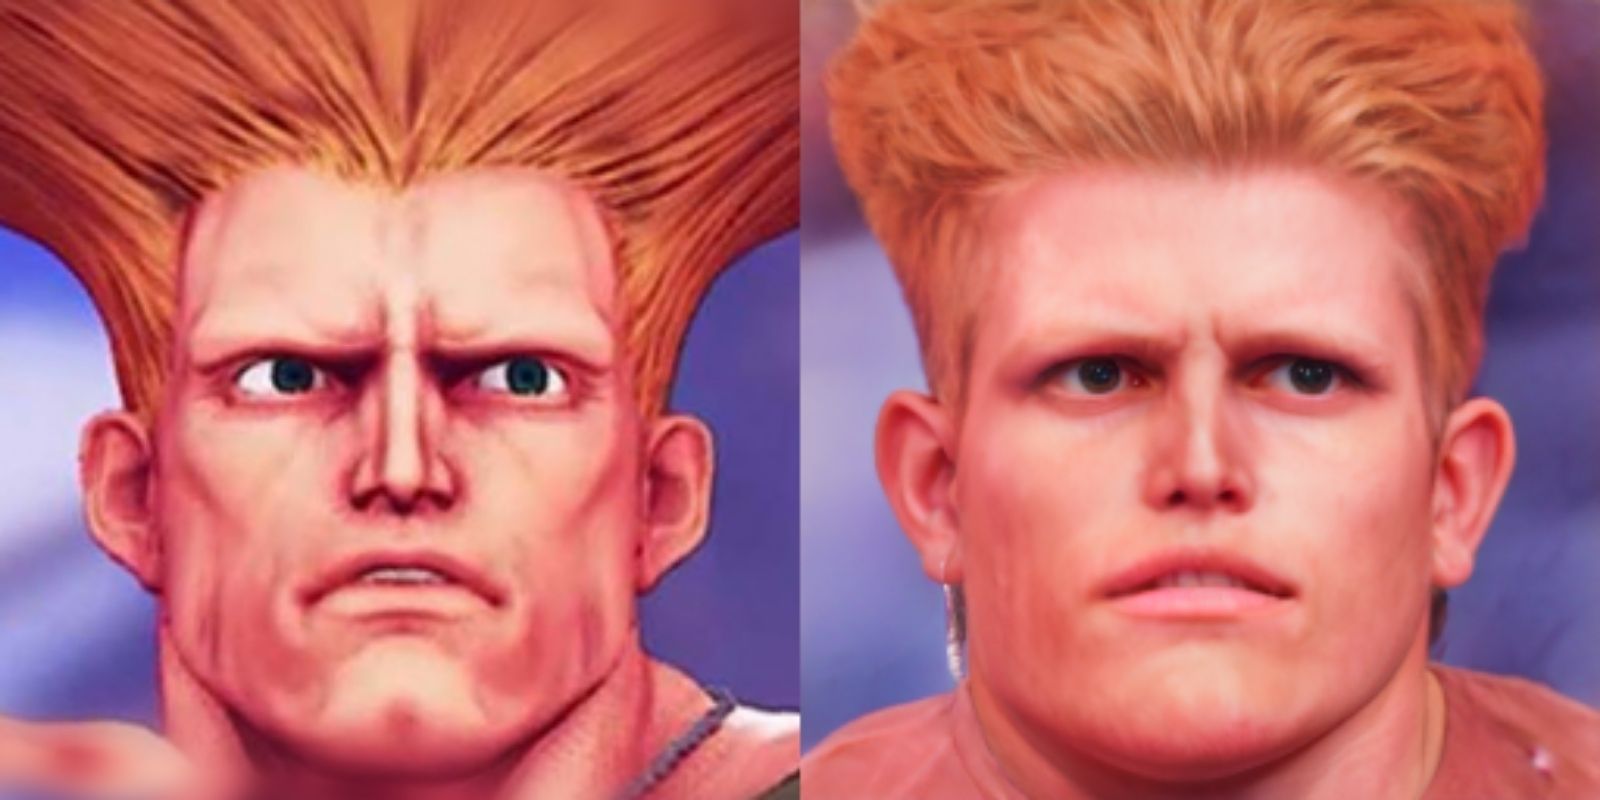 Street FIghter's Guile envisioned as a real person thanks to Google